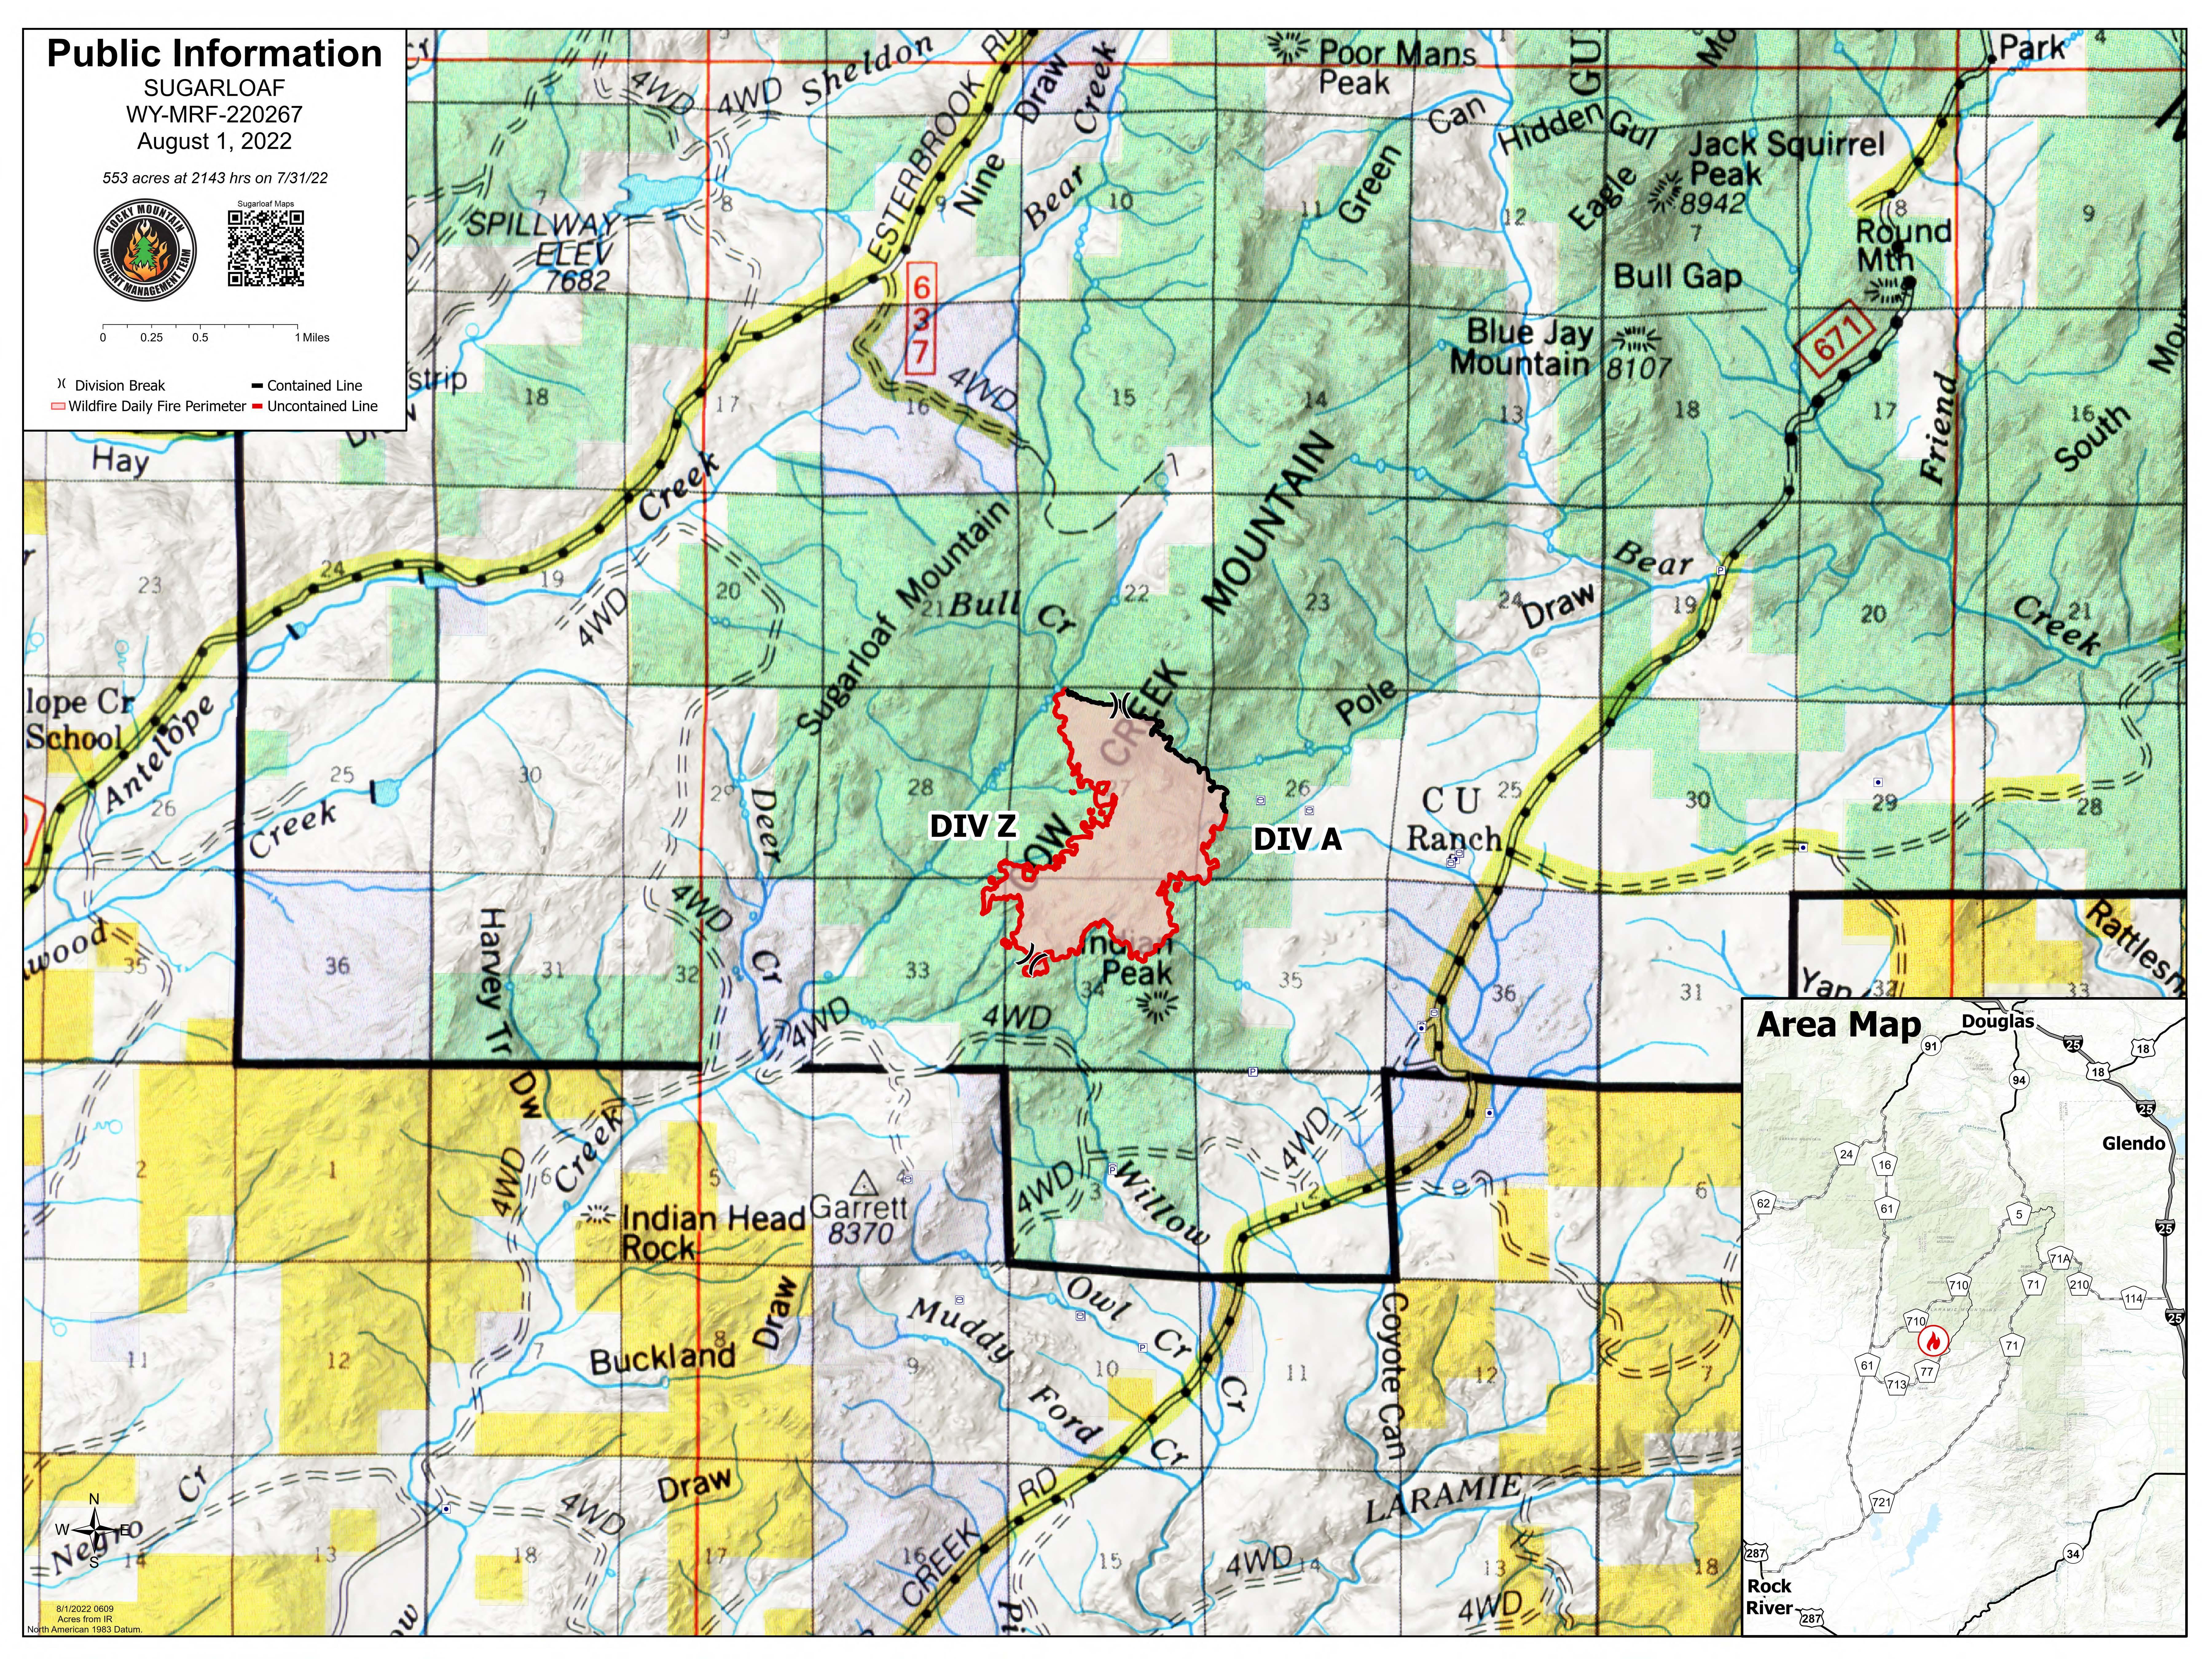 Sugarloaf Fire Public Information Map for August 1